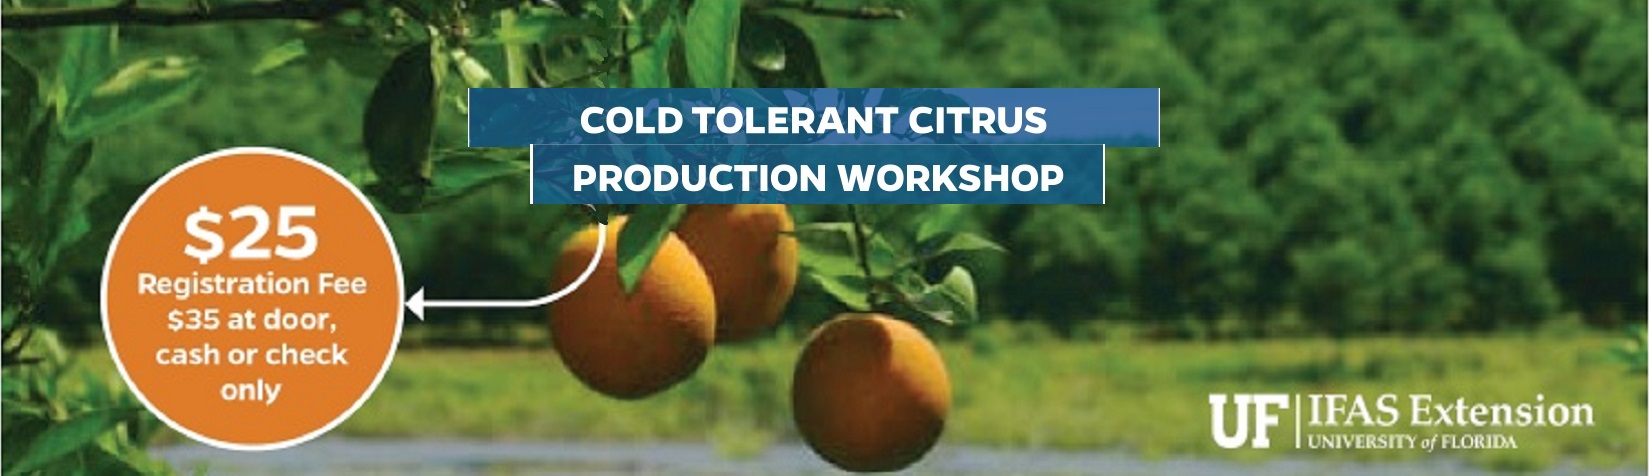 cold tolerant citrus production workshop written in from of 3 orange fruits on a tree.